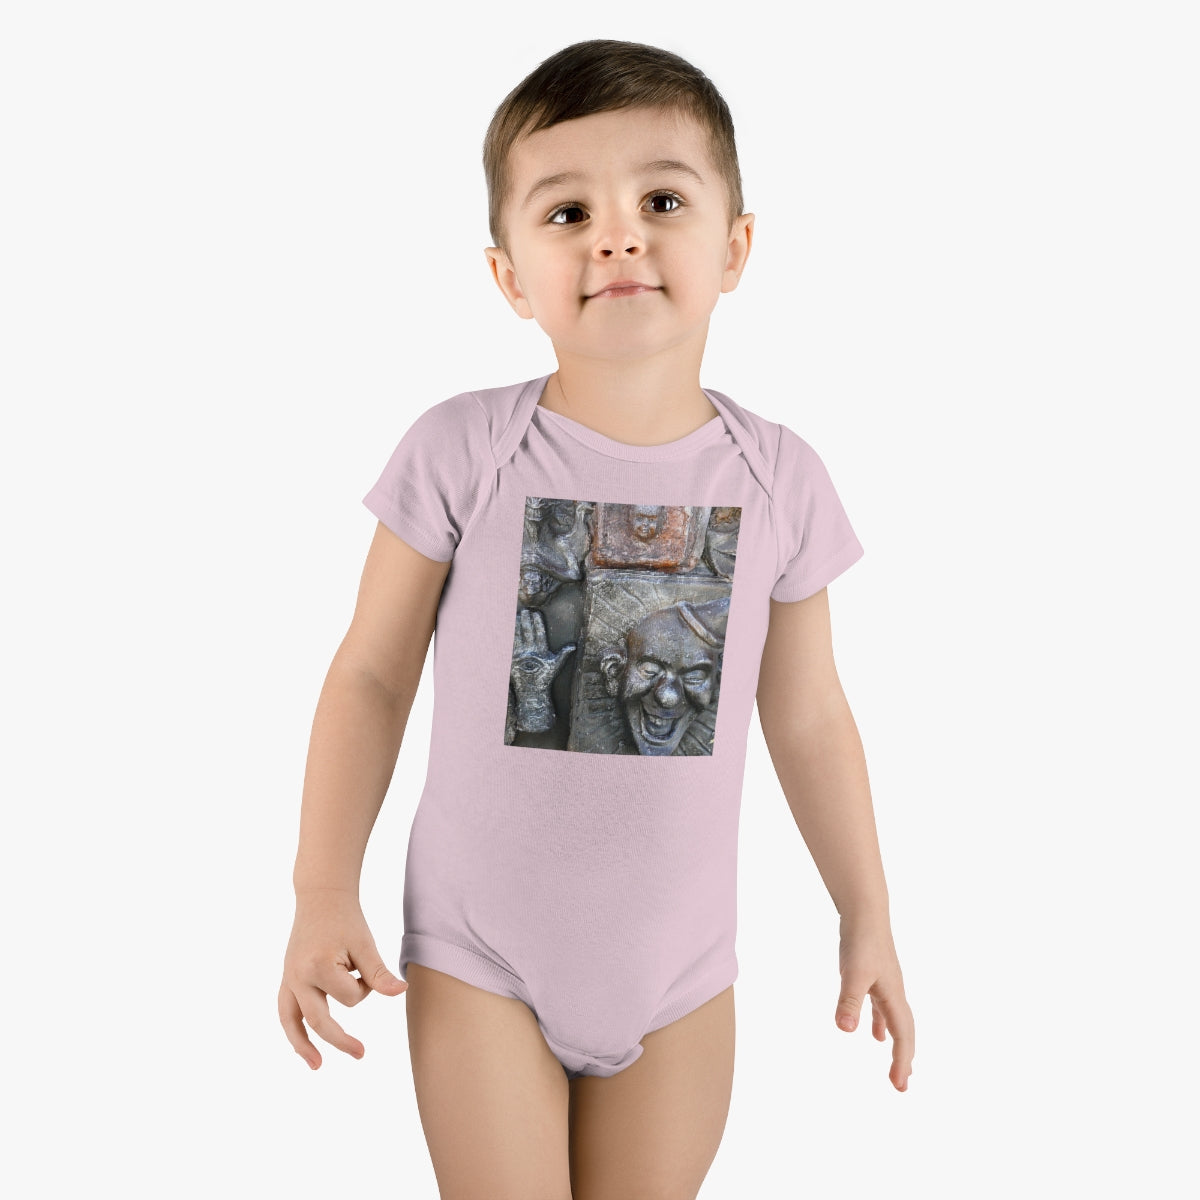 Cosmic Laughter - Baby Short Sleeve Onesie - Fry1Productions